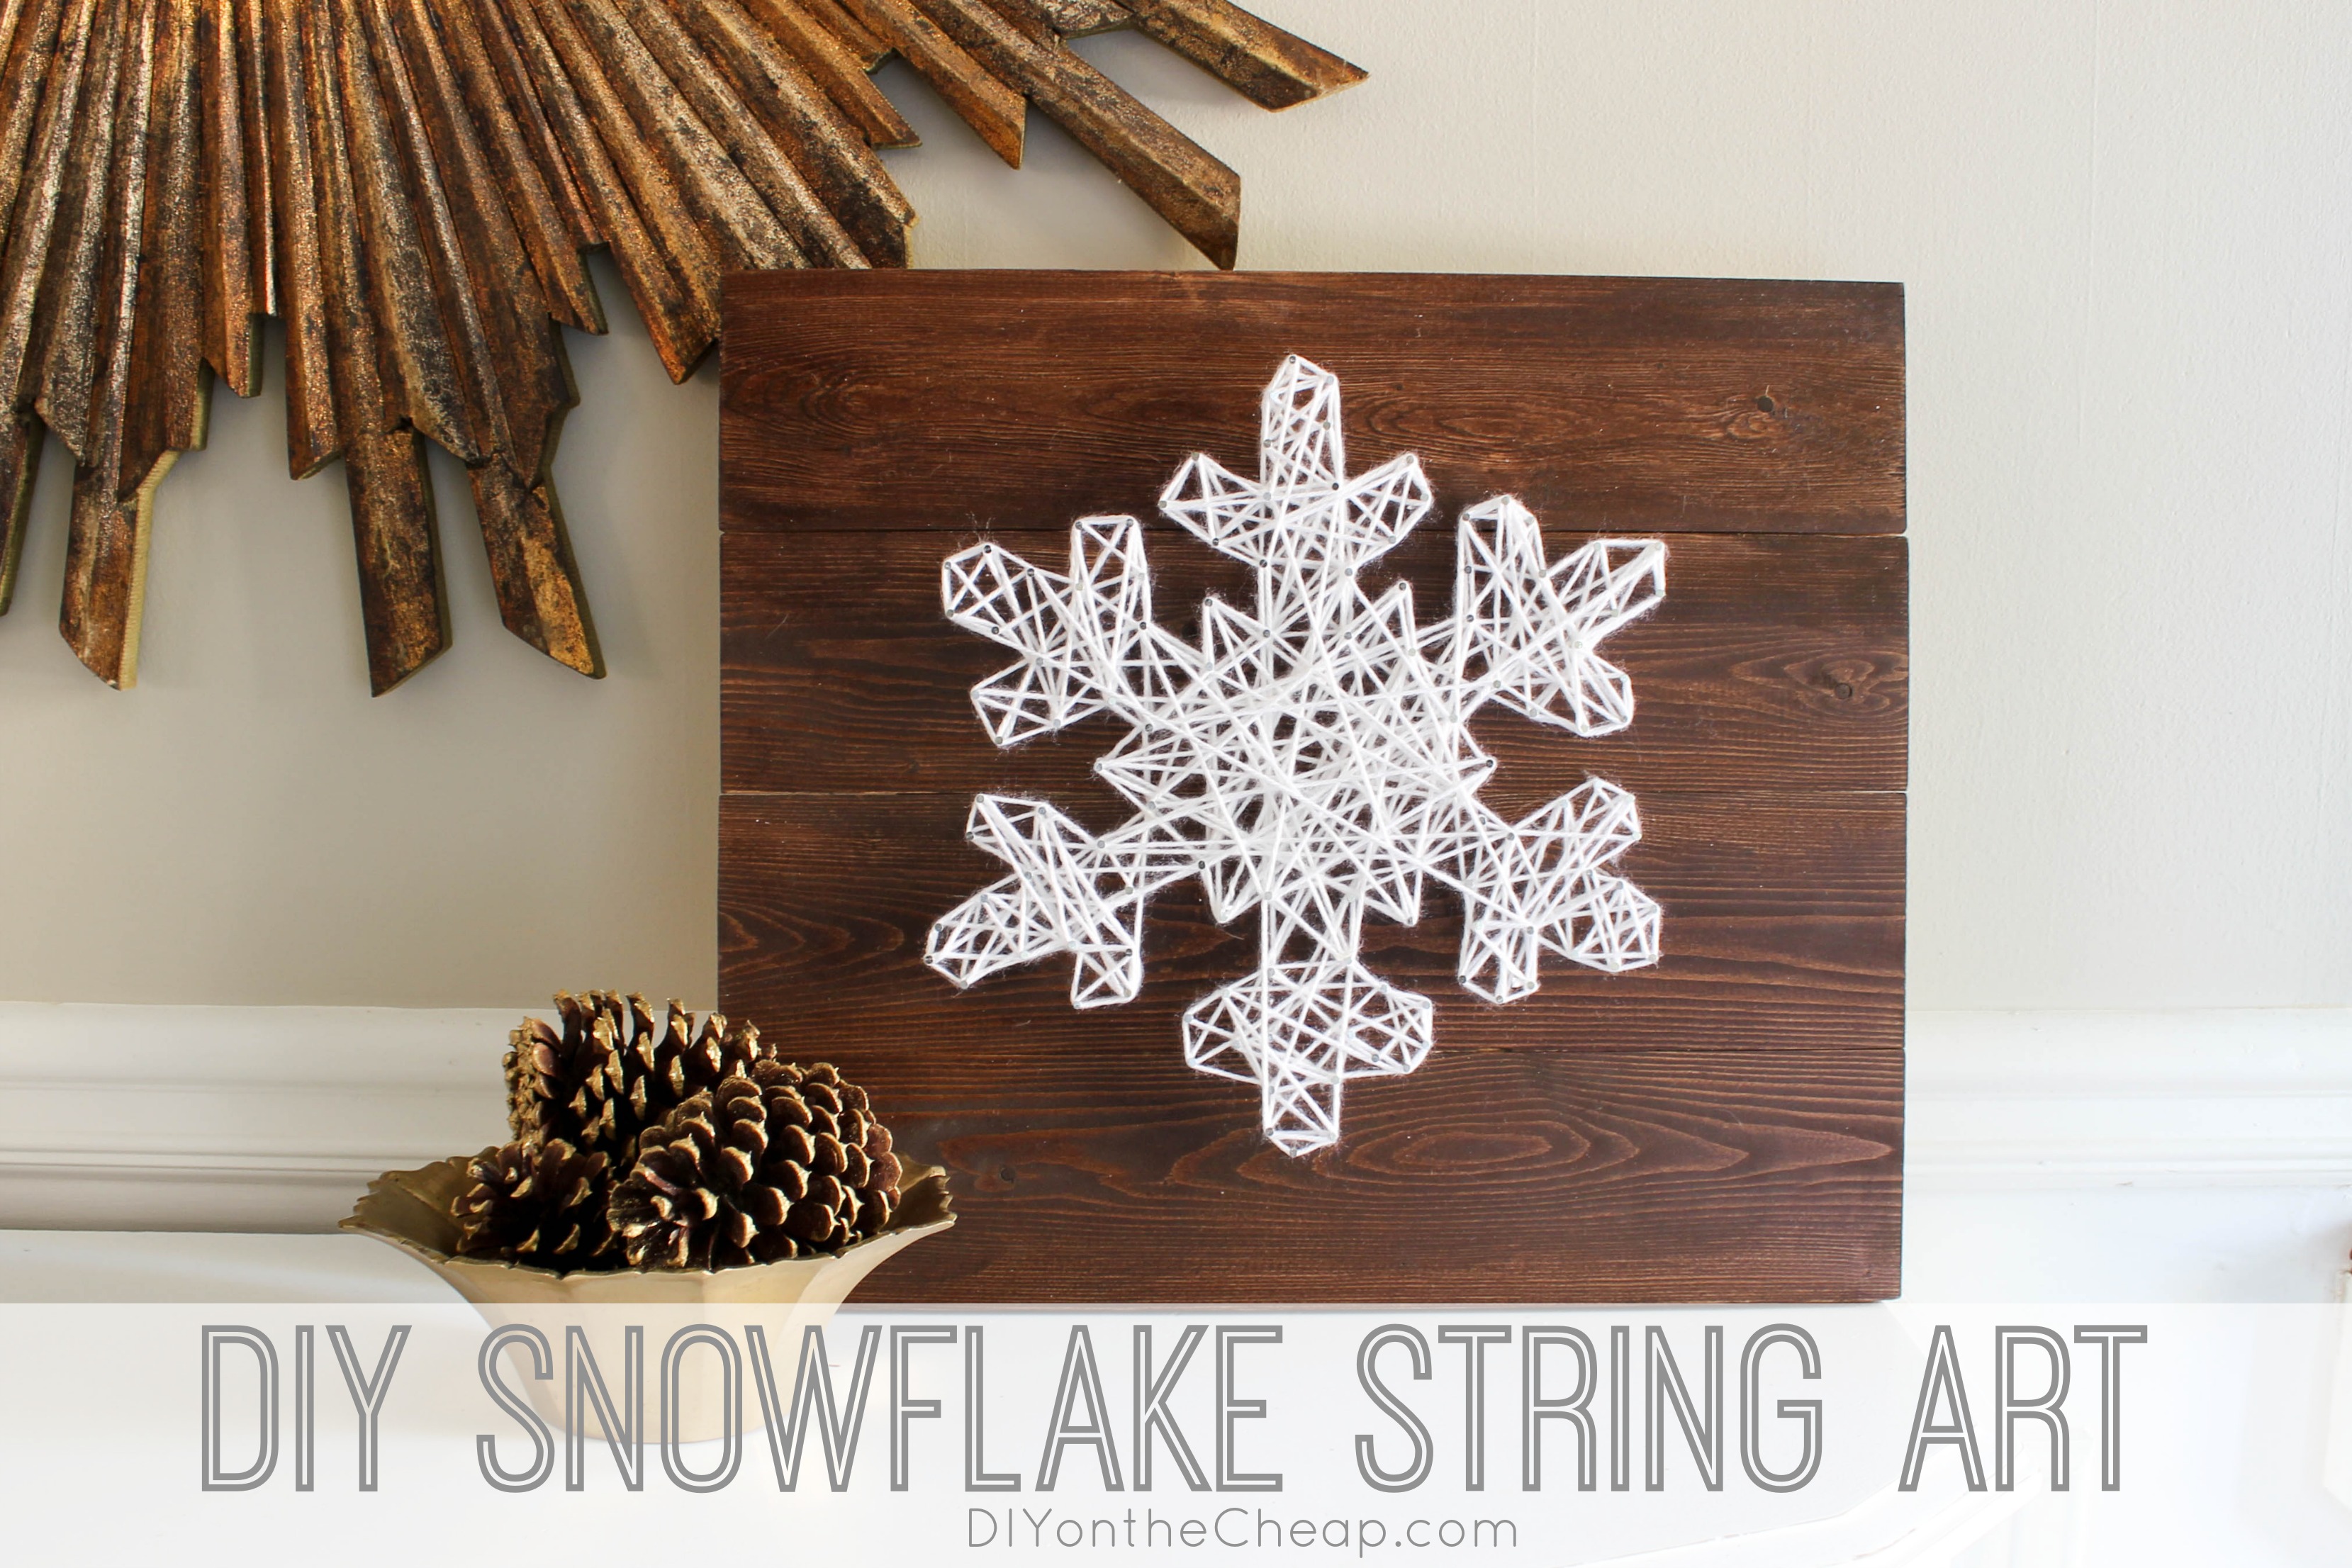 DIY Snowflake String Art + 18 Easy to Build Christmas Projects Erin Spain